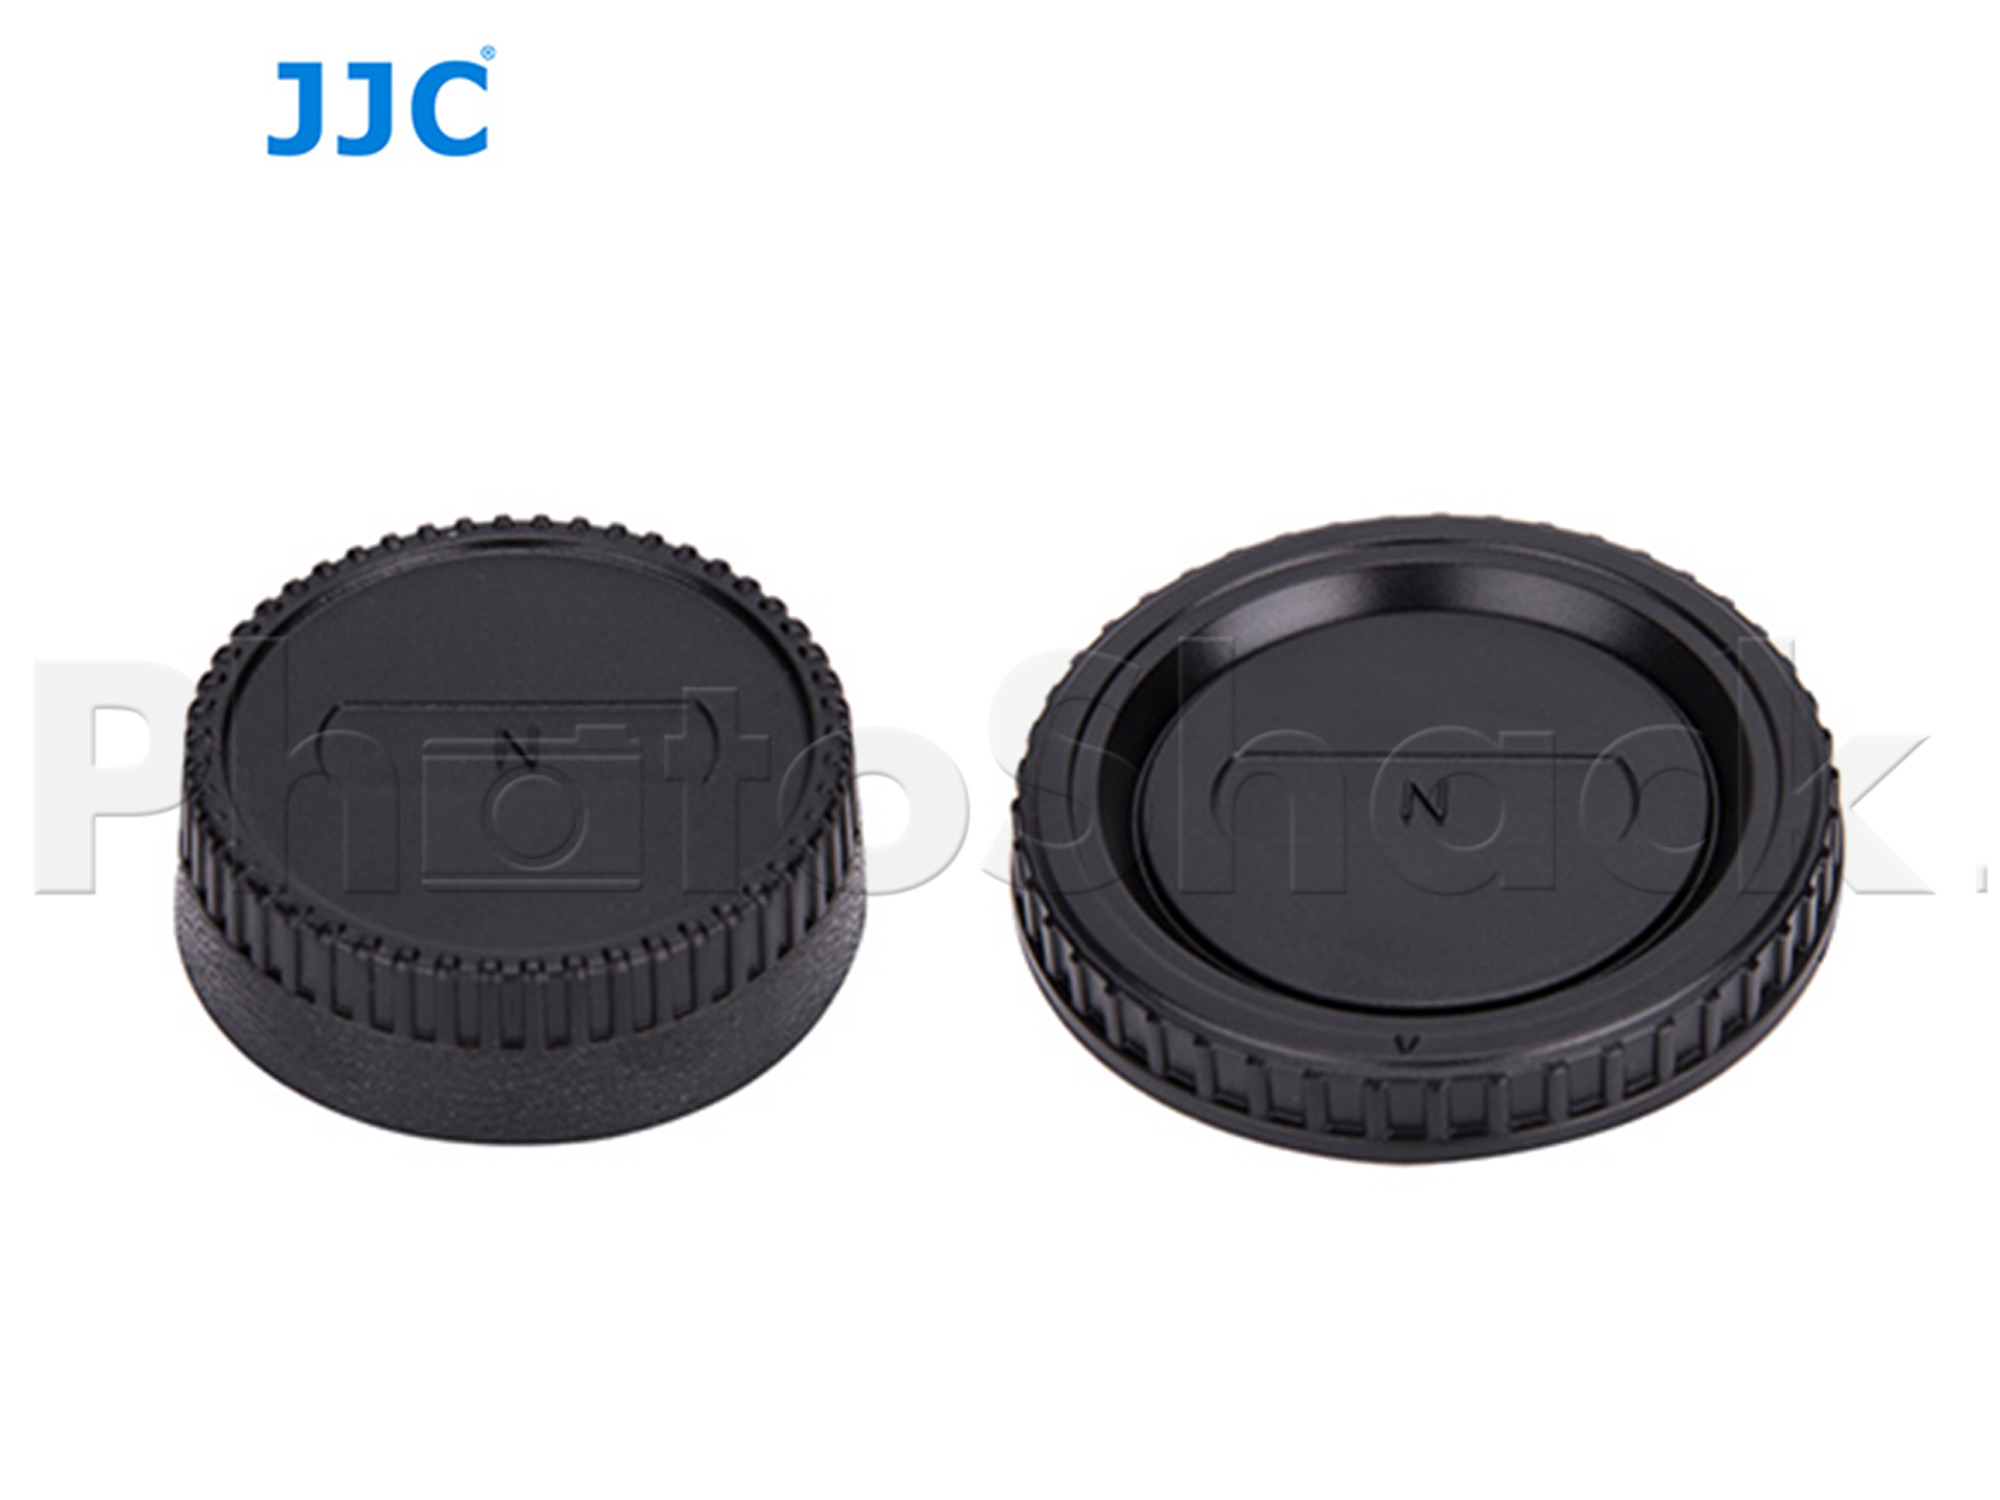 Body and Rear Lens Caps for Nikon